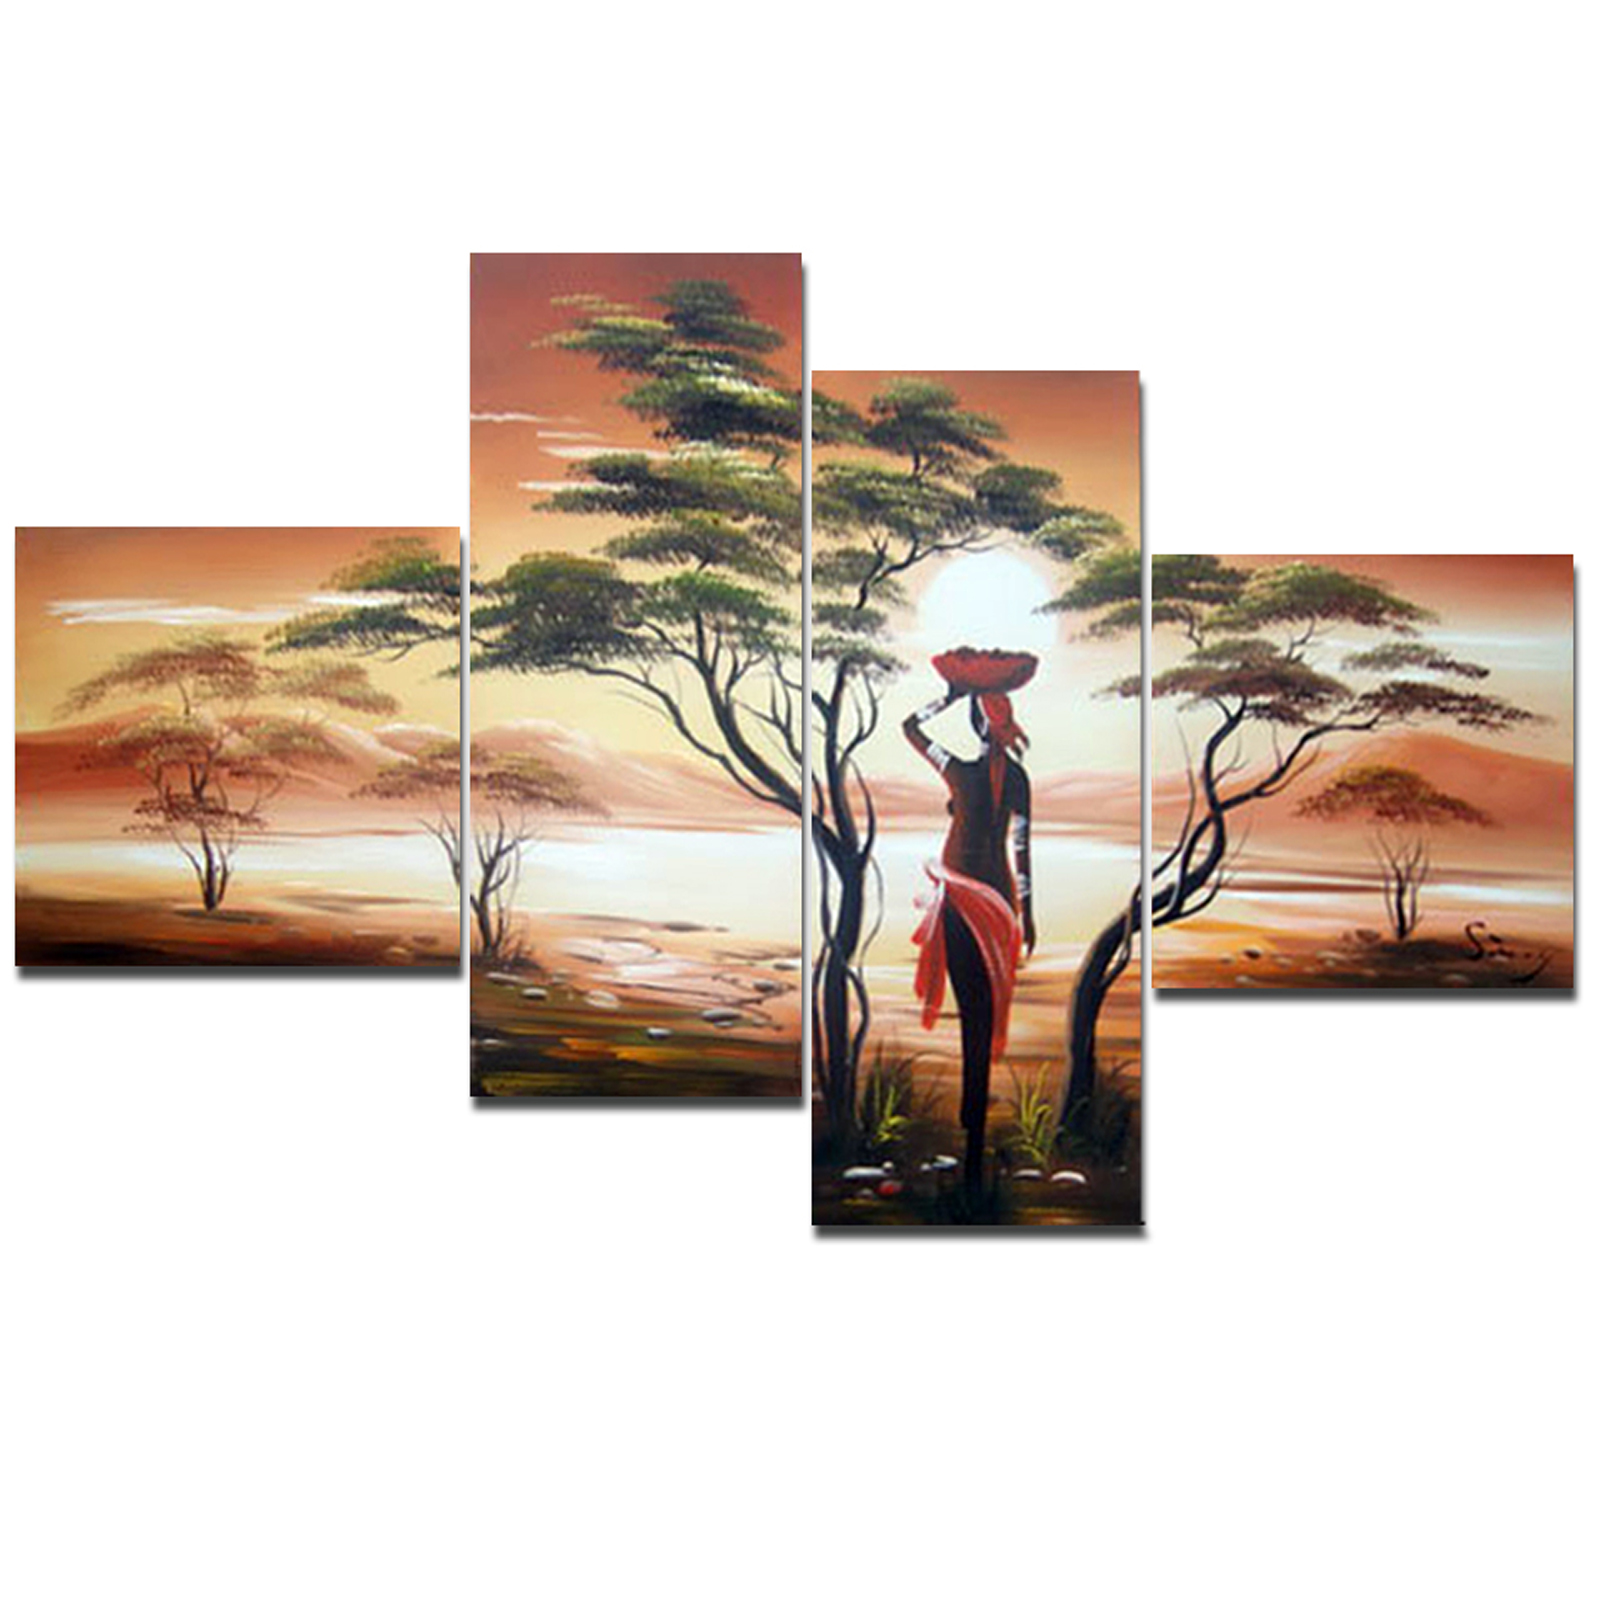 African Woman Painting - 55 x 36 in - 4 Panels